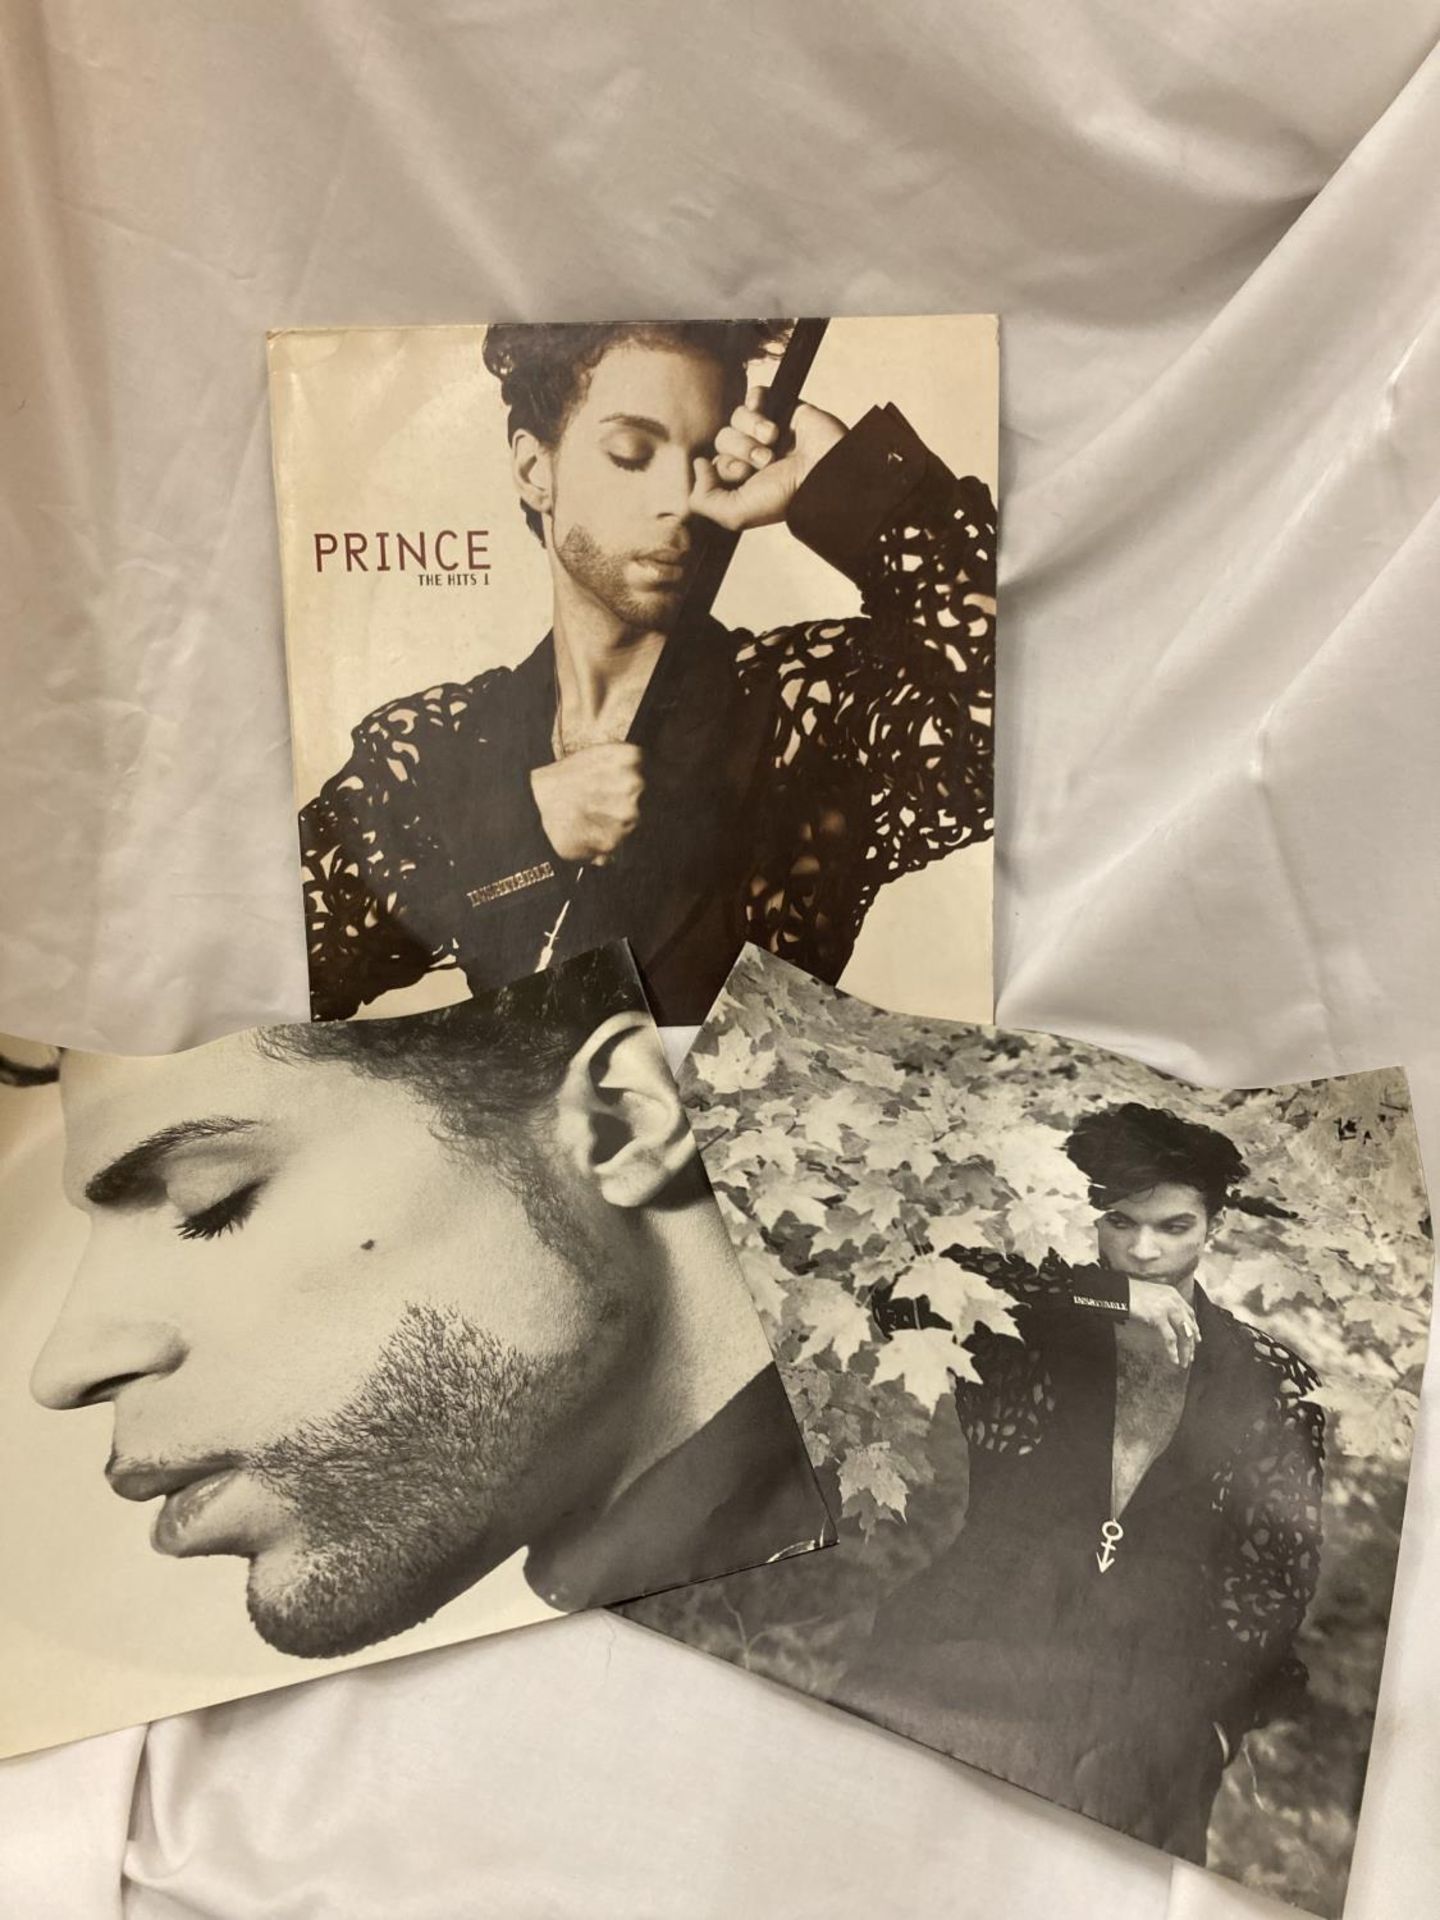 A FIRST PRESSING OF PRINCE - THE HITS VOLUMES 1 AND 2 ON VINYL